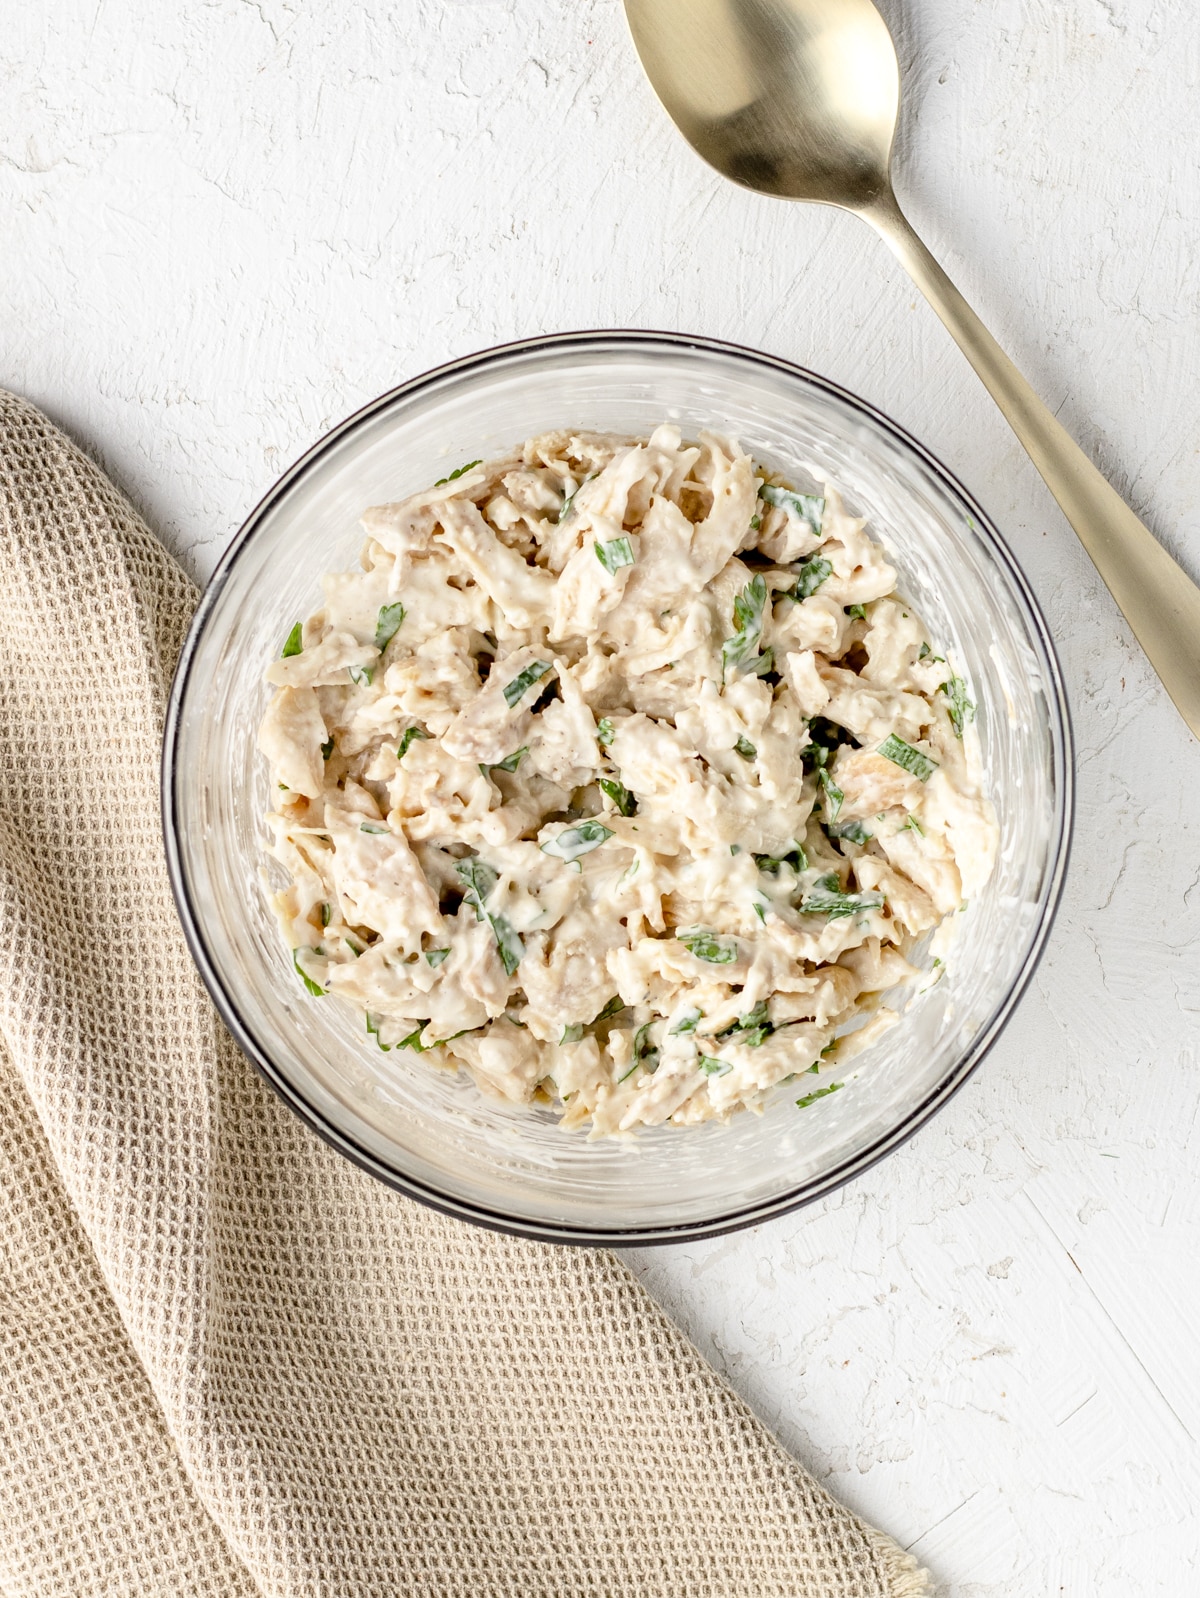 Shredded chicken mixed together in a bowl with ranch dressing and fresh parsley.